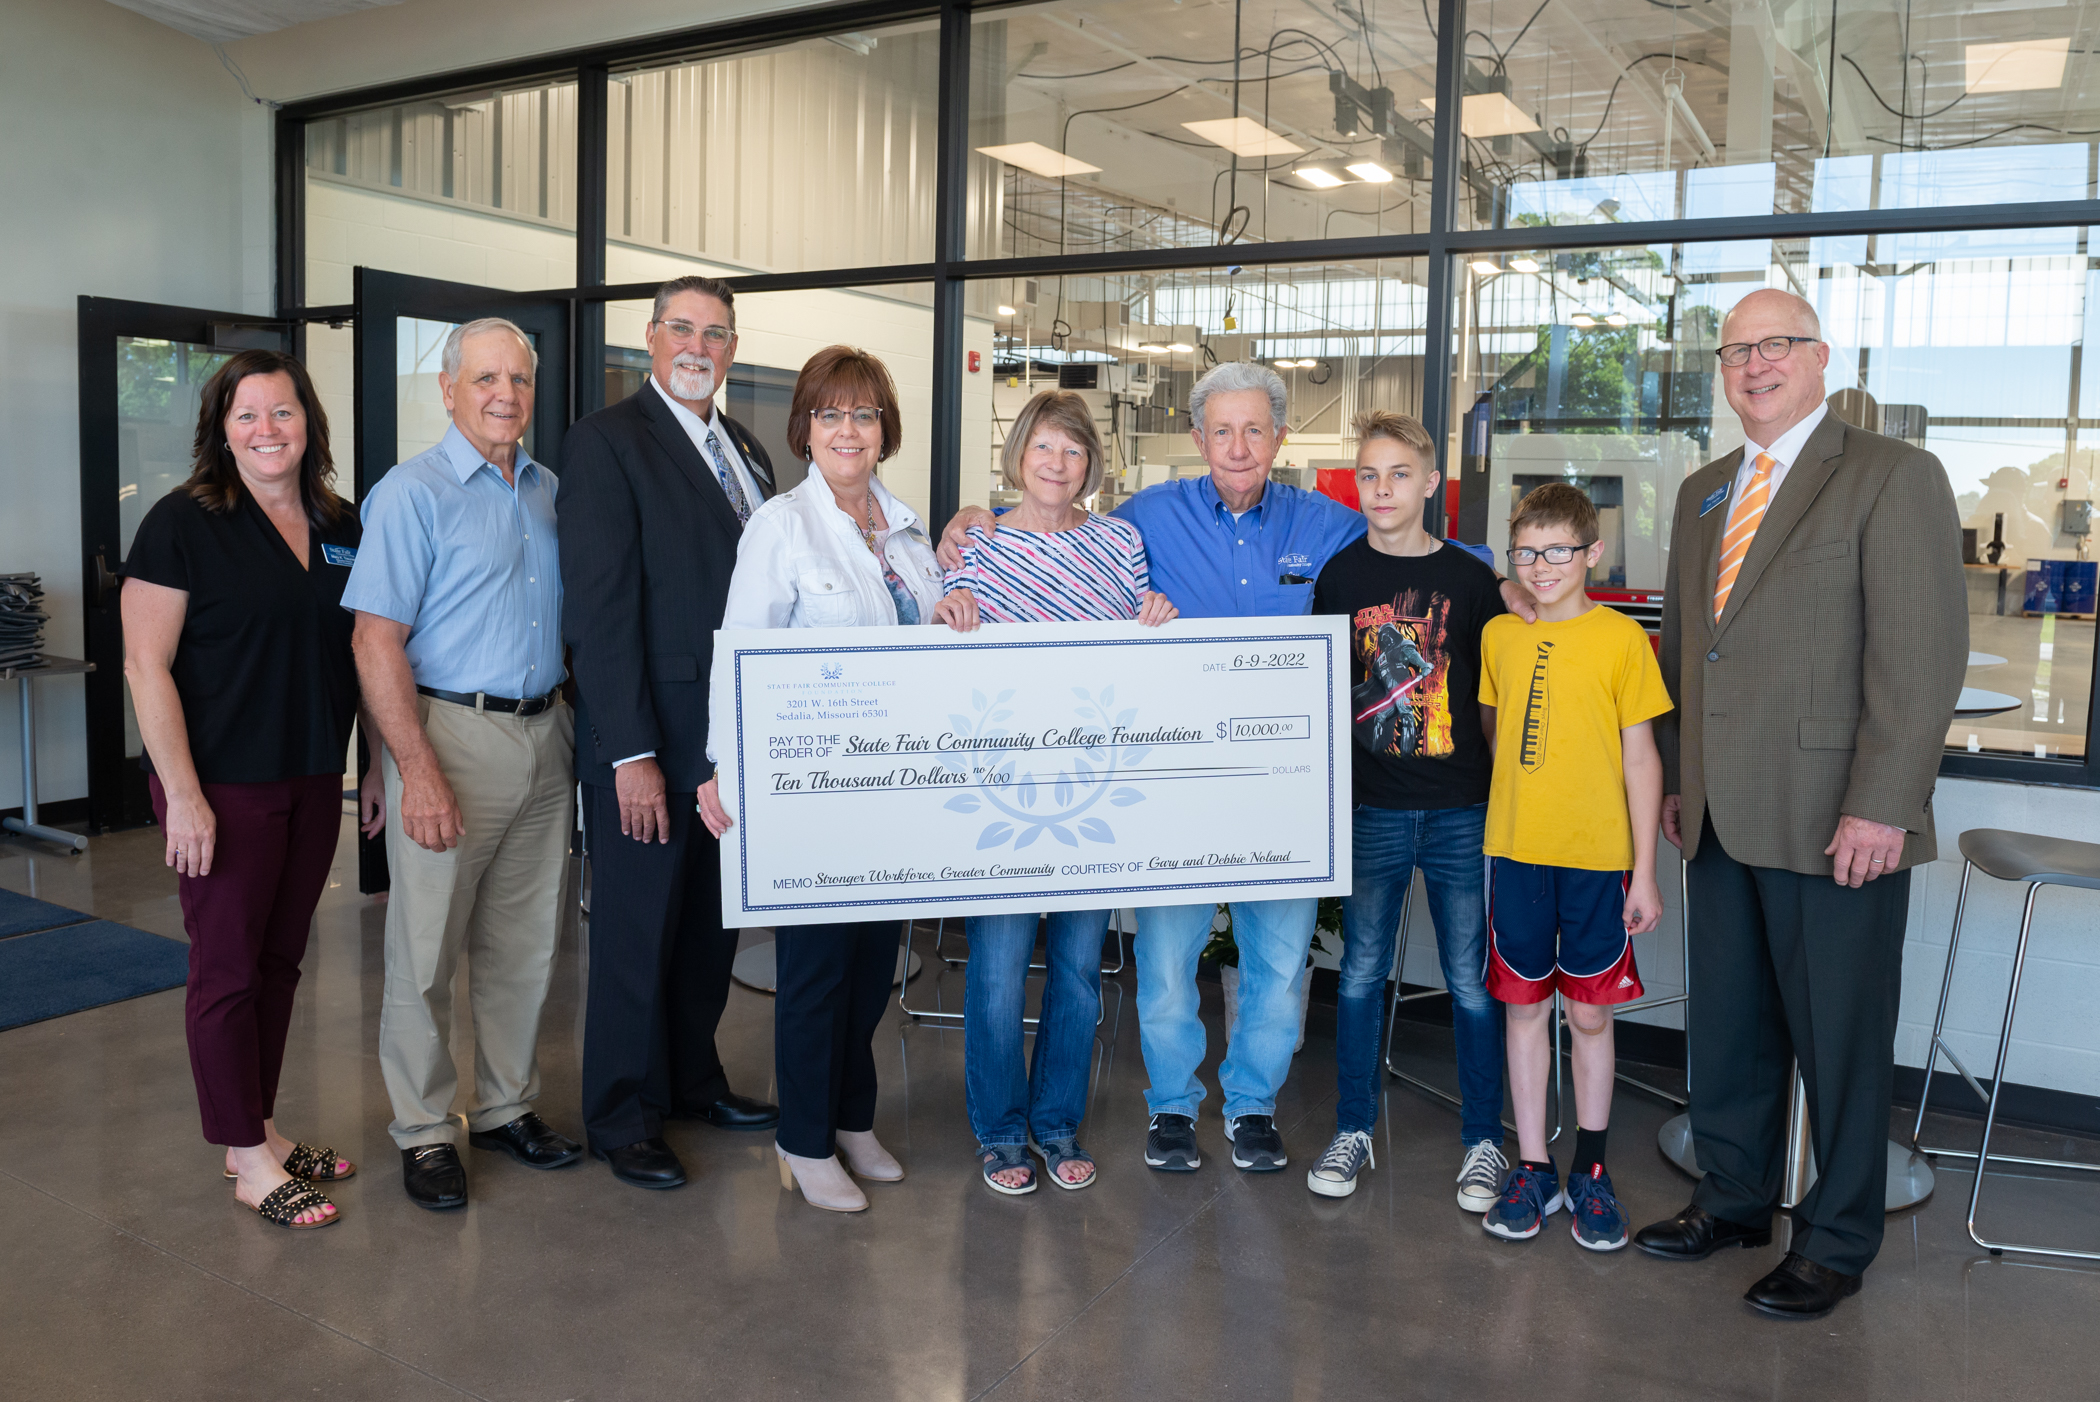 Read more about Nolands donate $10,000 to SFCC’s capital campaign